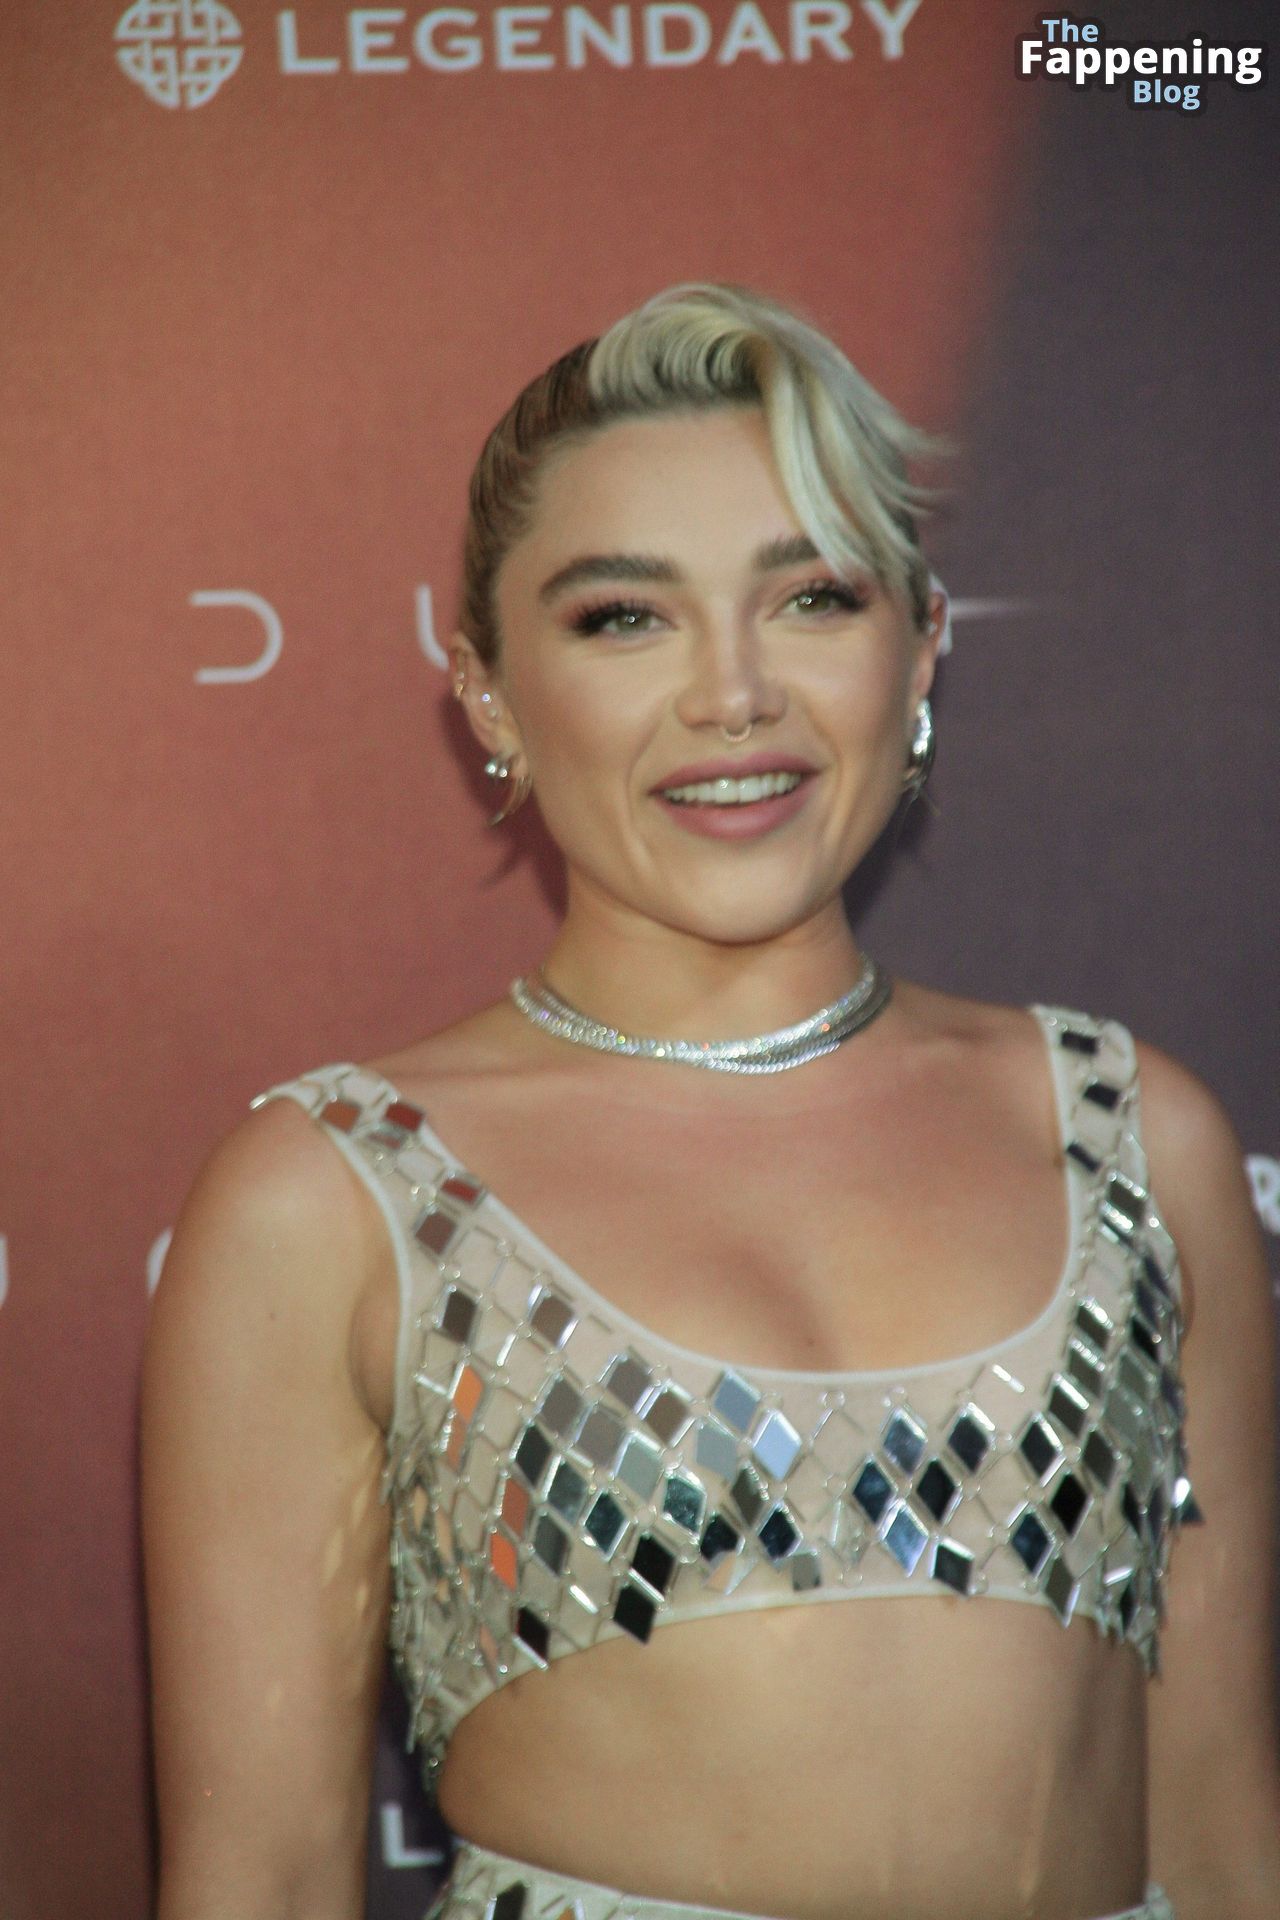 Florence-Pugh-Sexy-36-The-Fappening-Blog.jpg